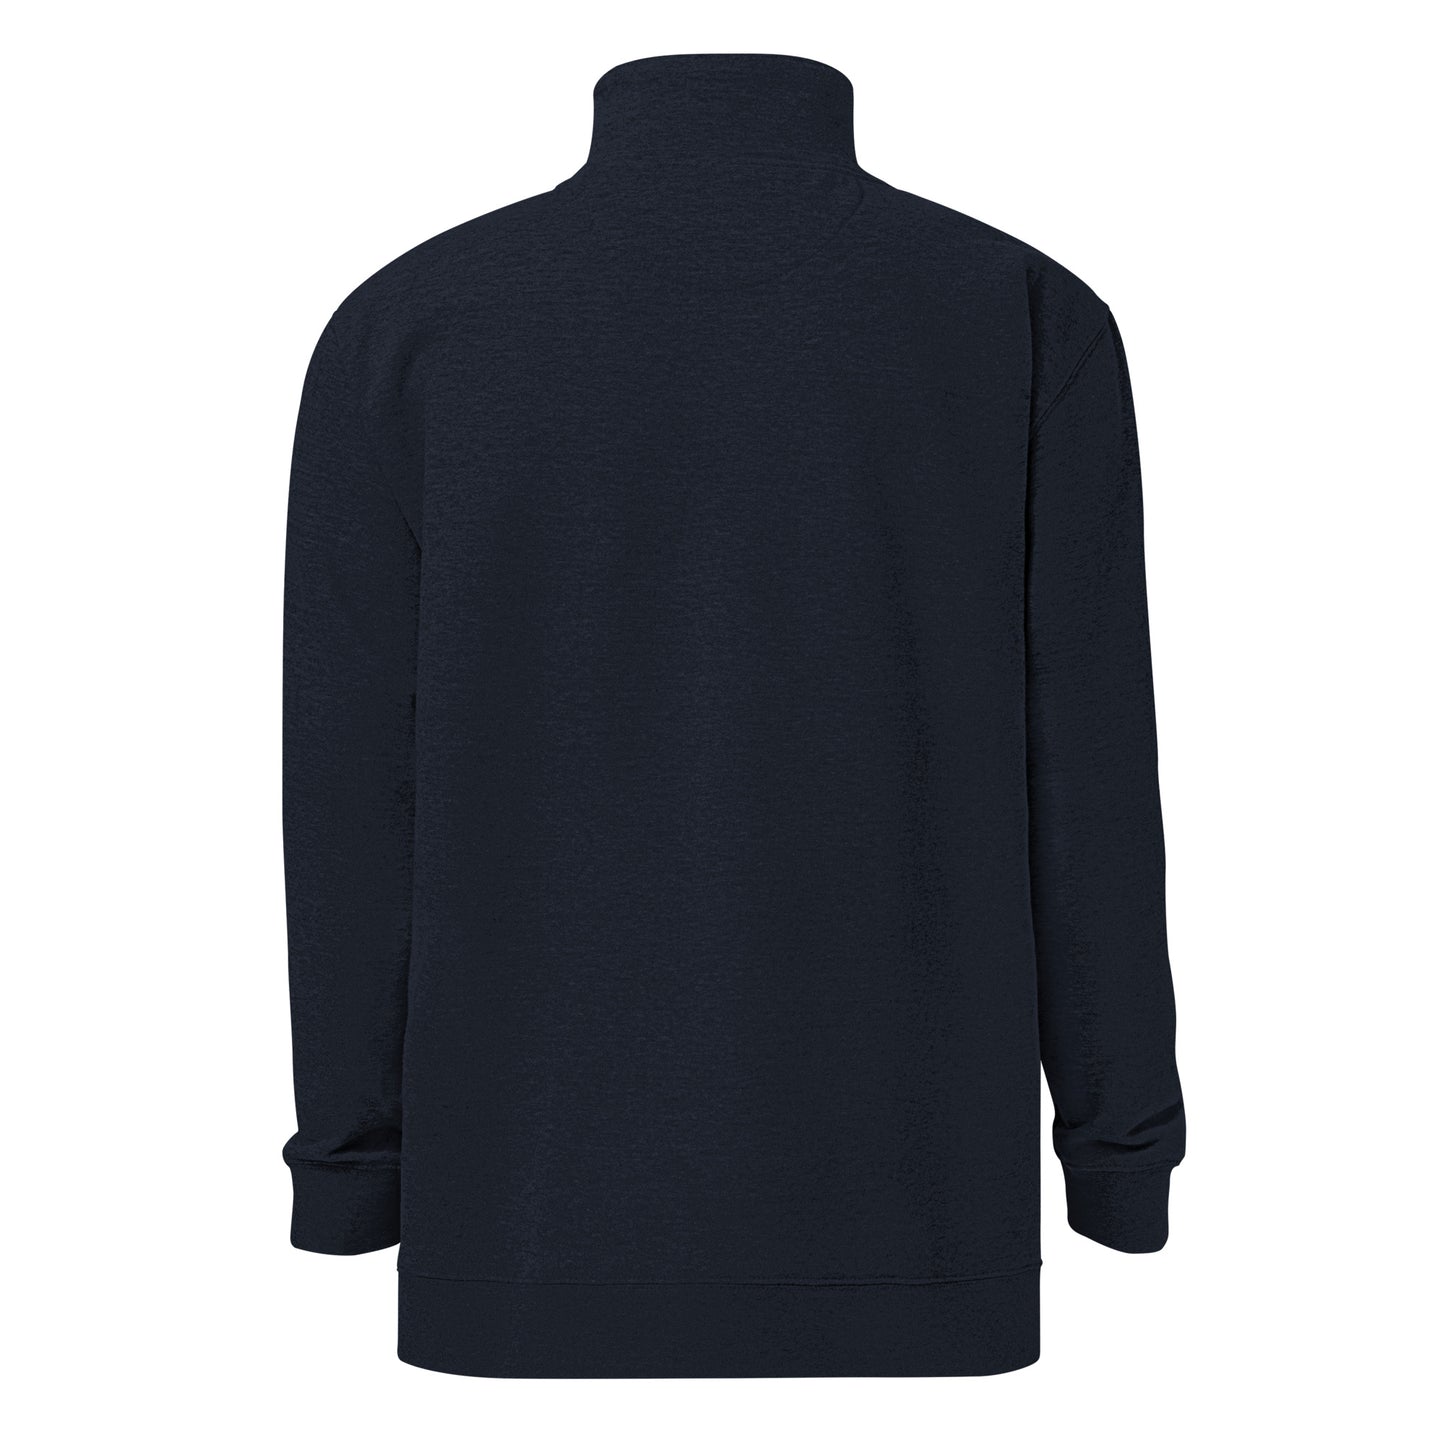 Men’s sweaters, Humble Sportswear, pullover sweaters for men, pullovers for men, cotton pullover jackets for men